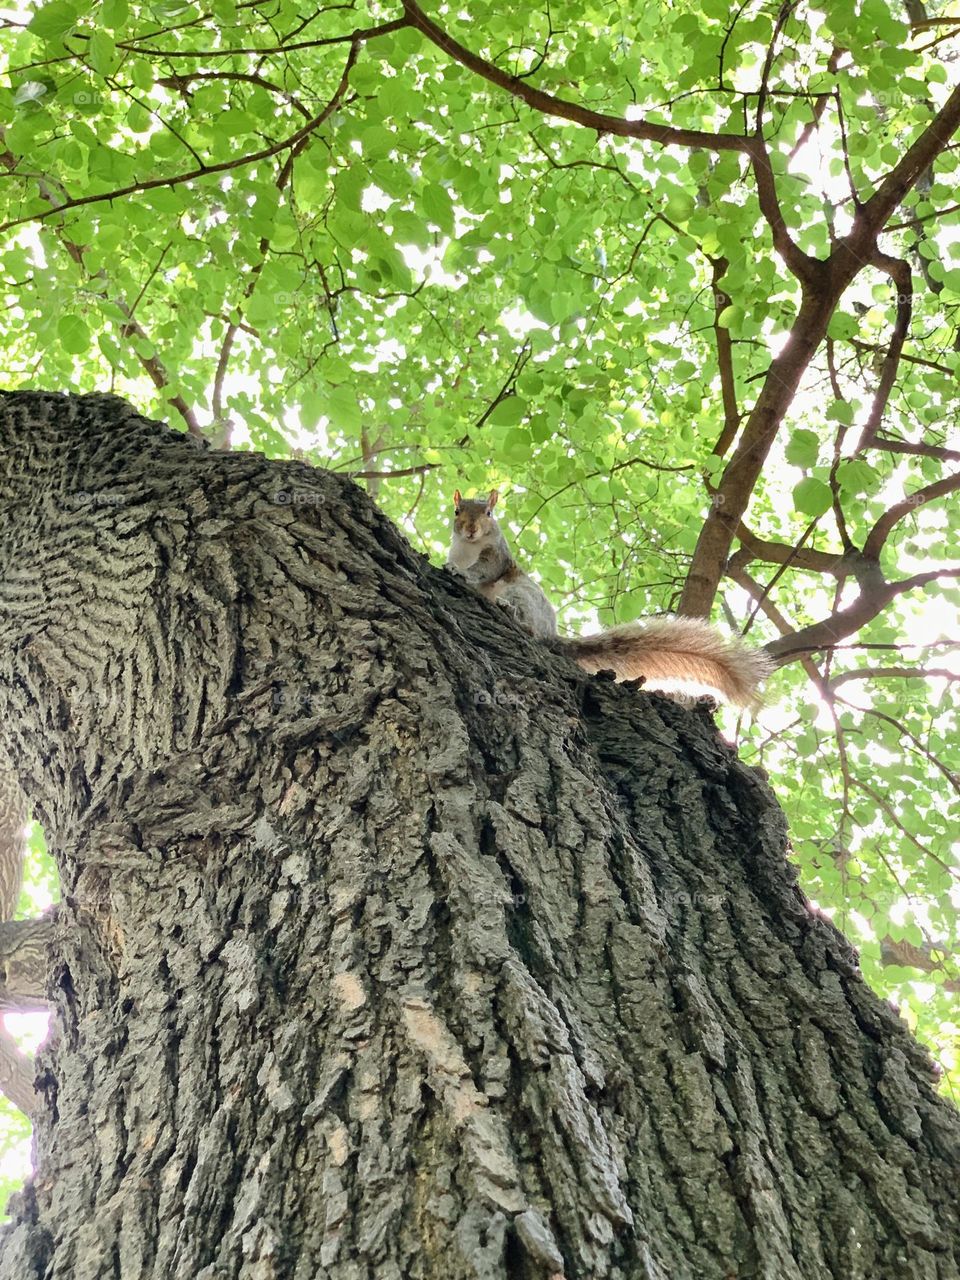 Squirrel climbing on the tree